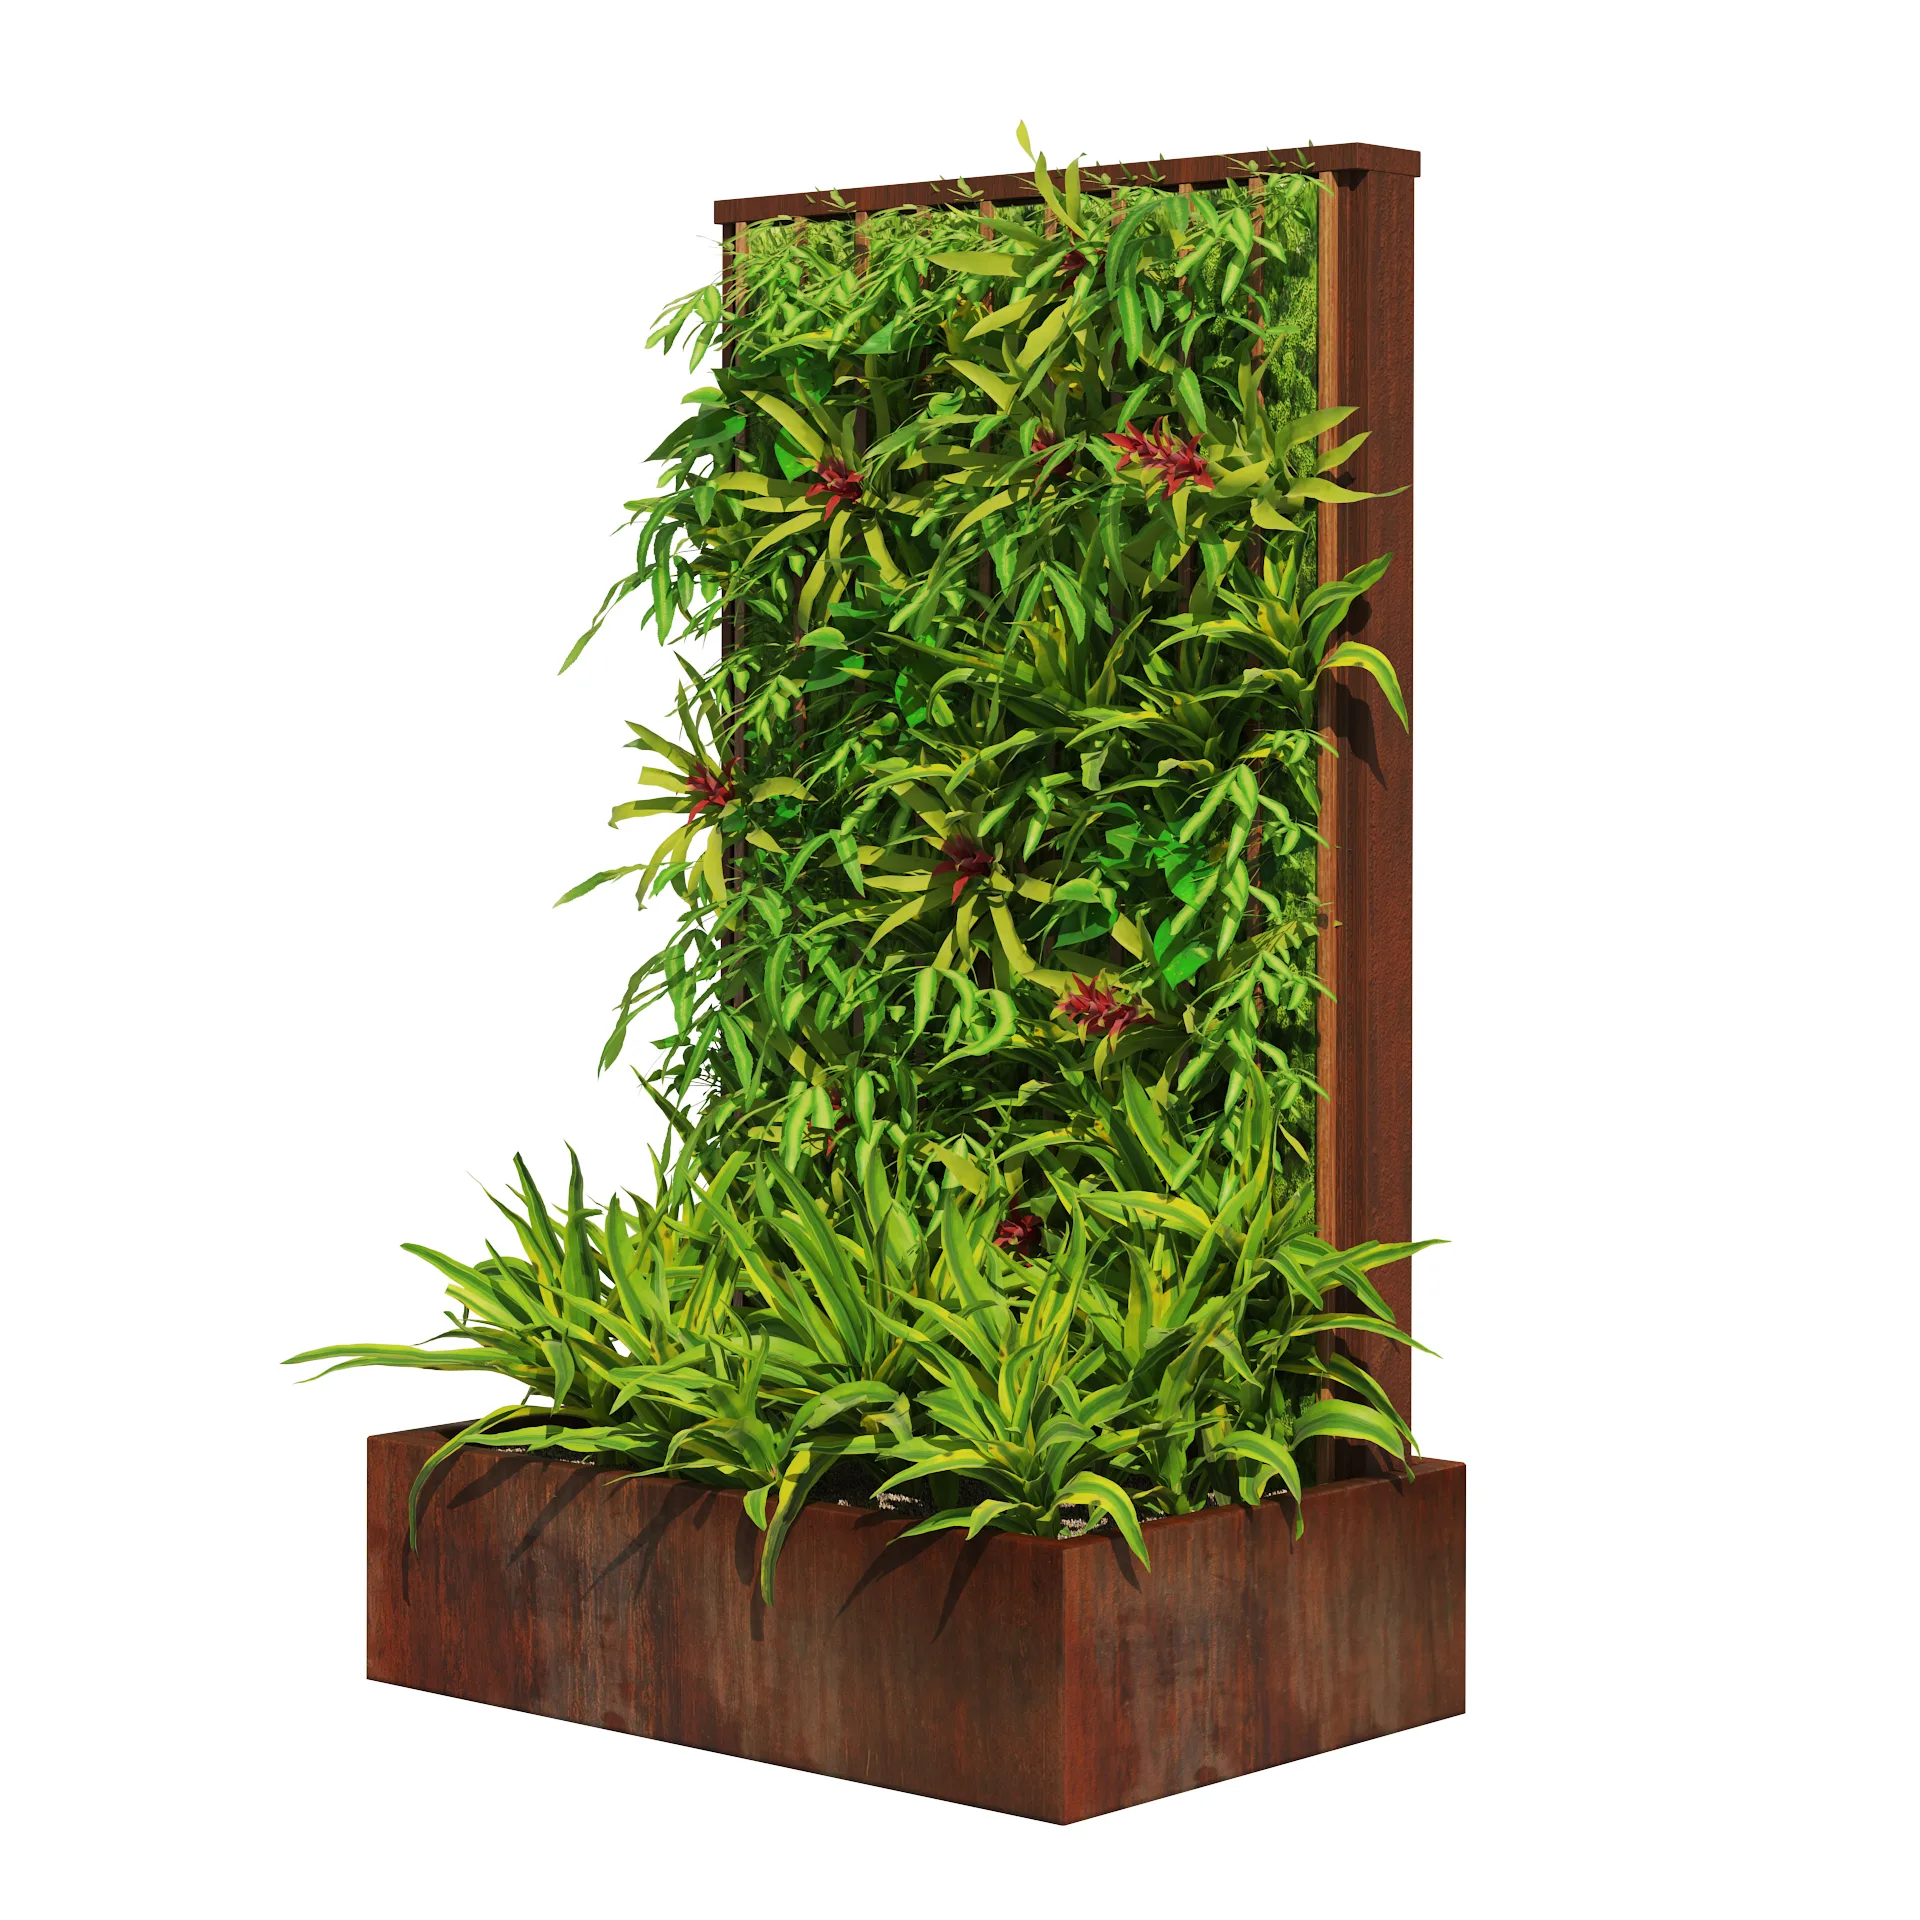 Greenwall Fitowall with plant box